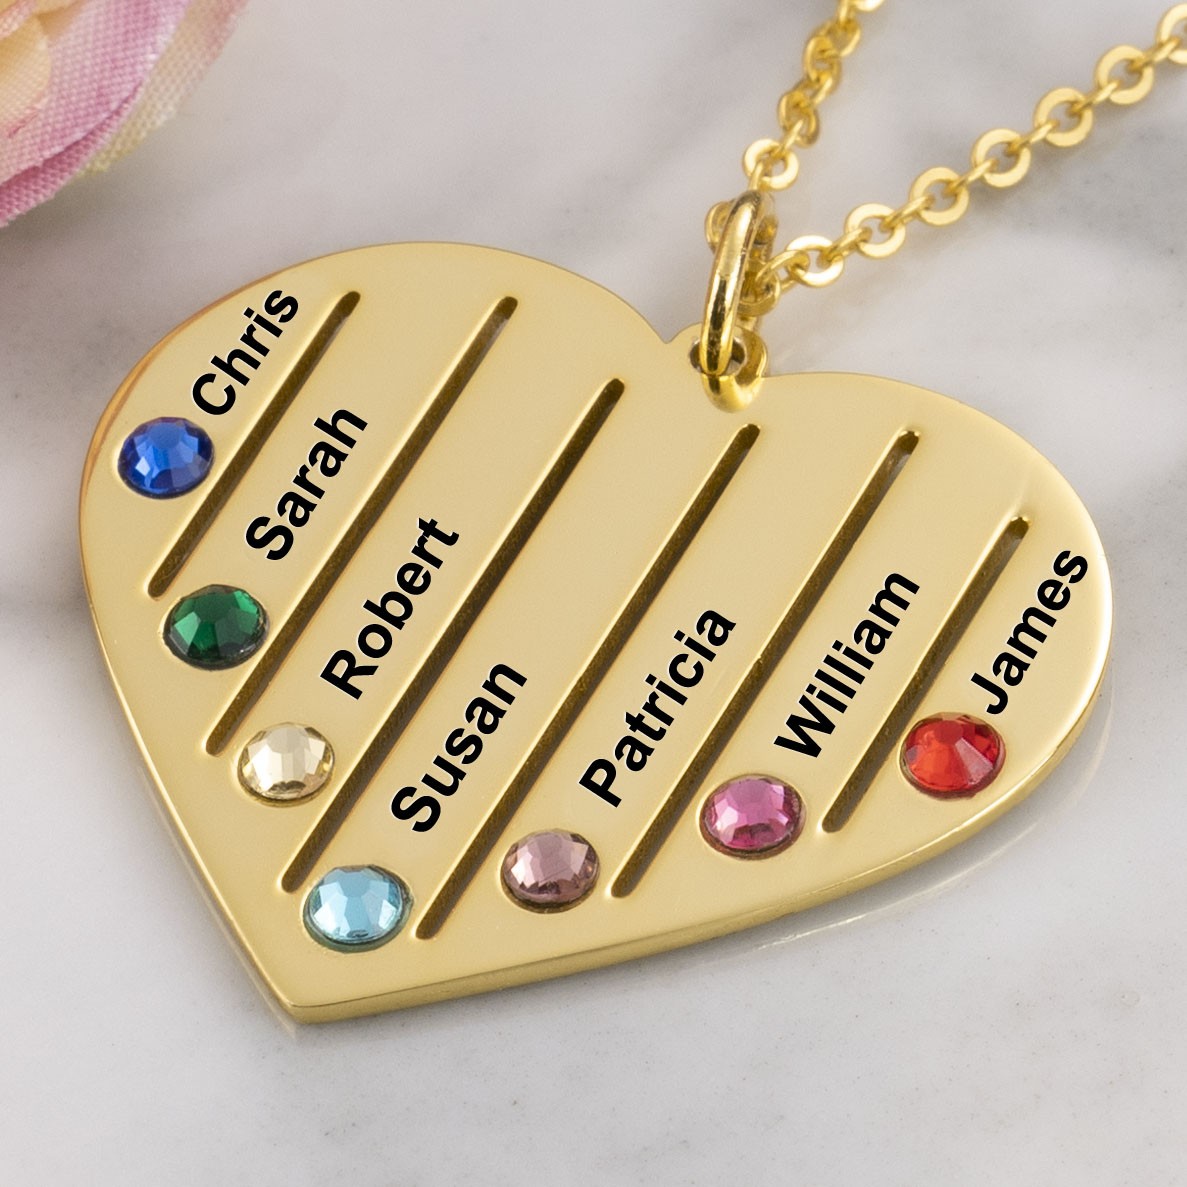 18K Gold Plating Personalized Necklace 1-7 Birthstones and Engravings Engraved Birthstone Necklace